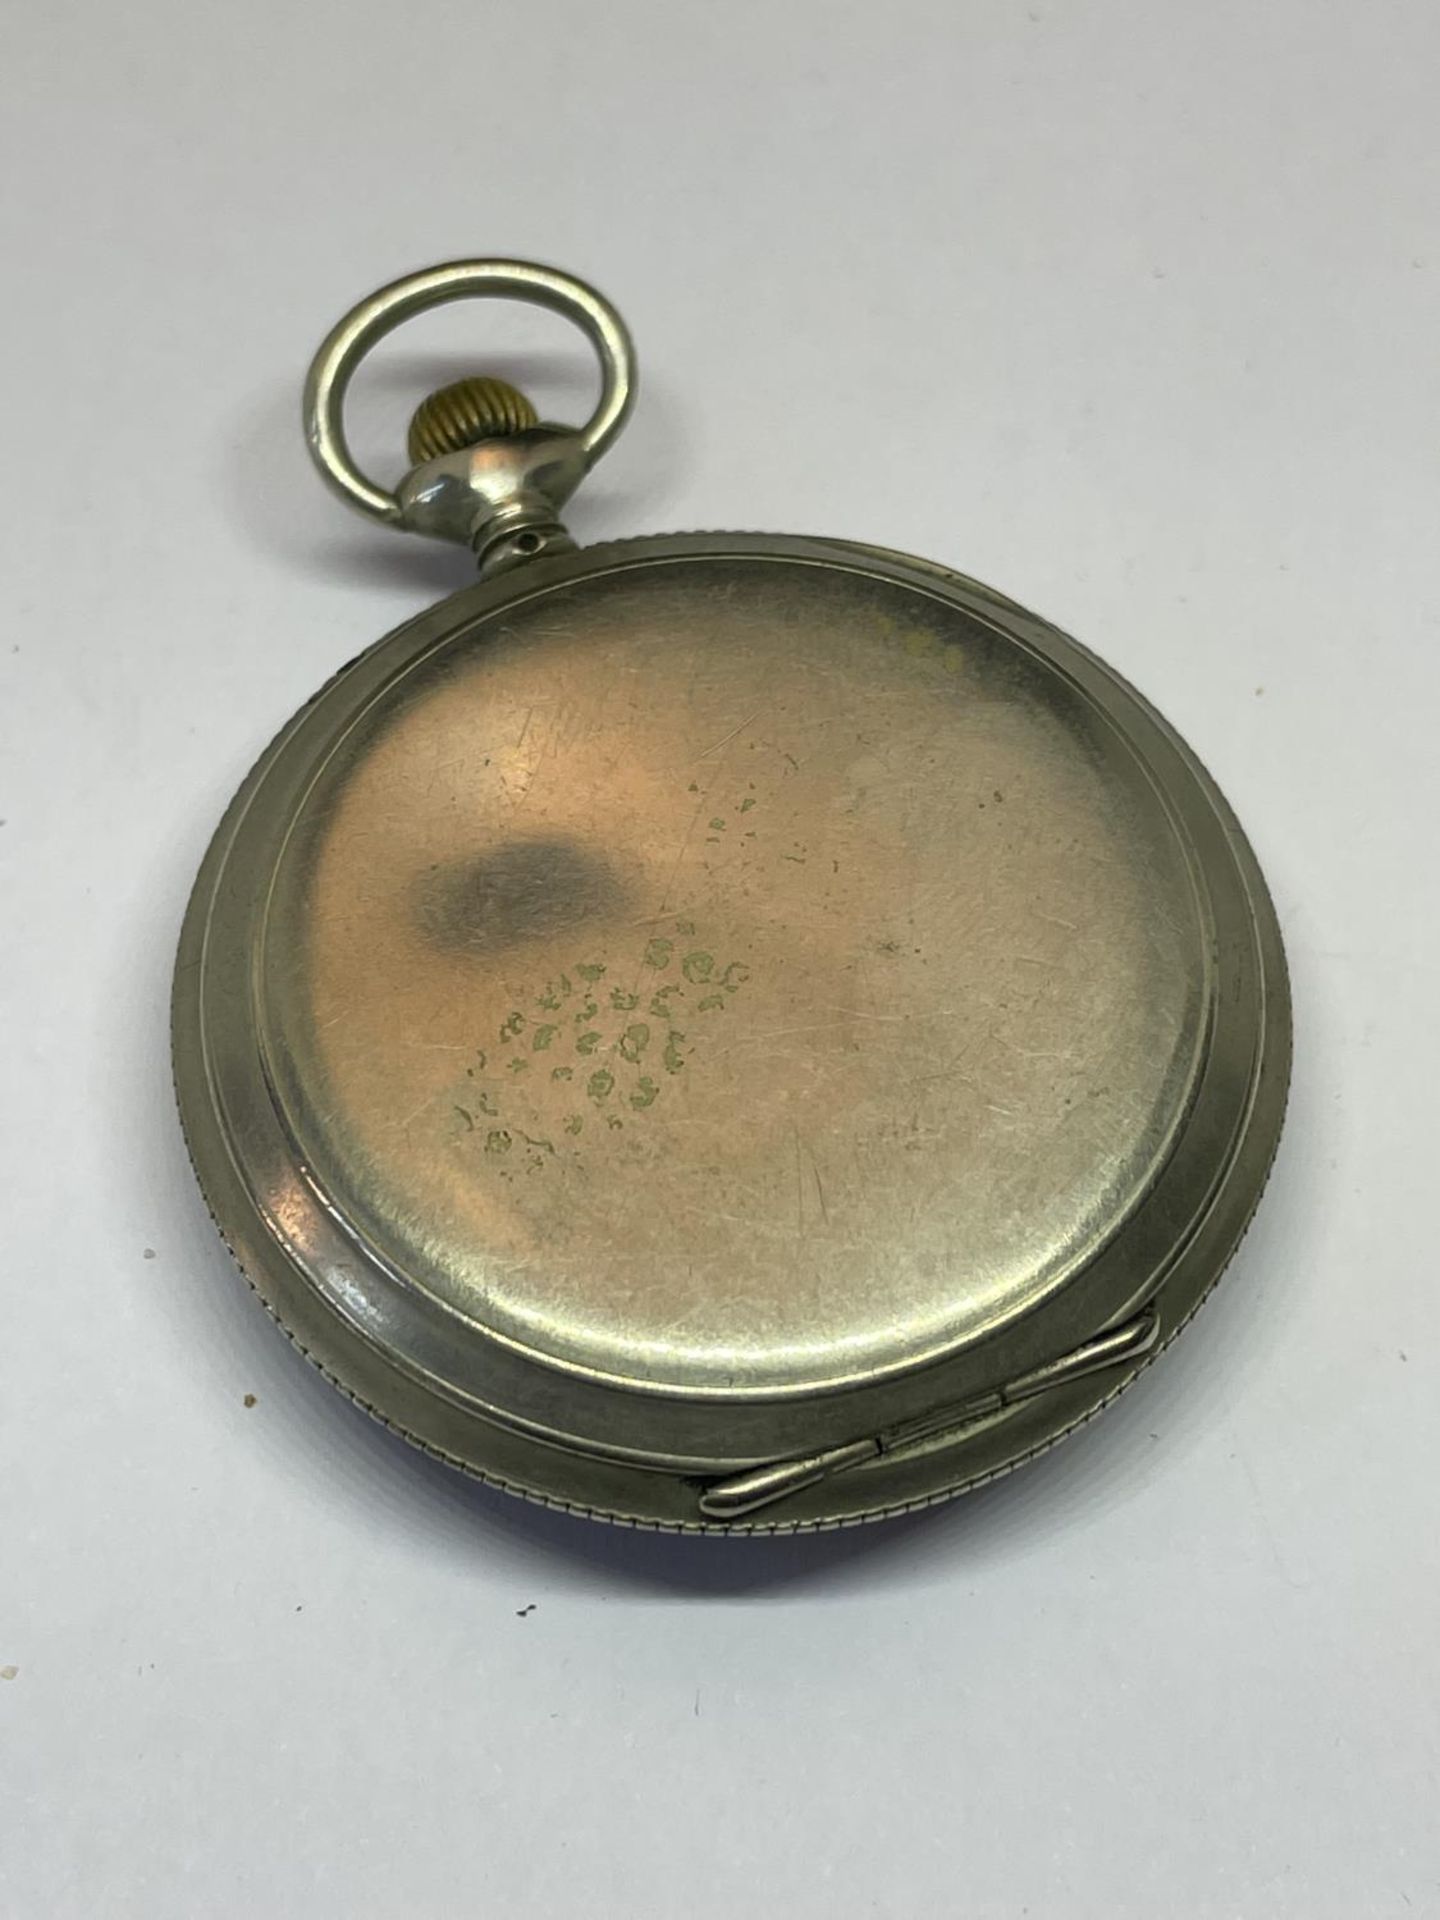 AN OMEGA POCKET WATCH SEEN WORKING BUT NO WARRANTY - Image 2 of 4